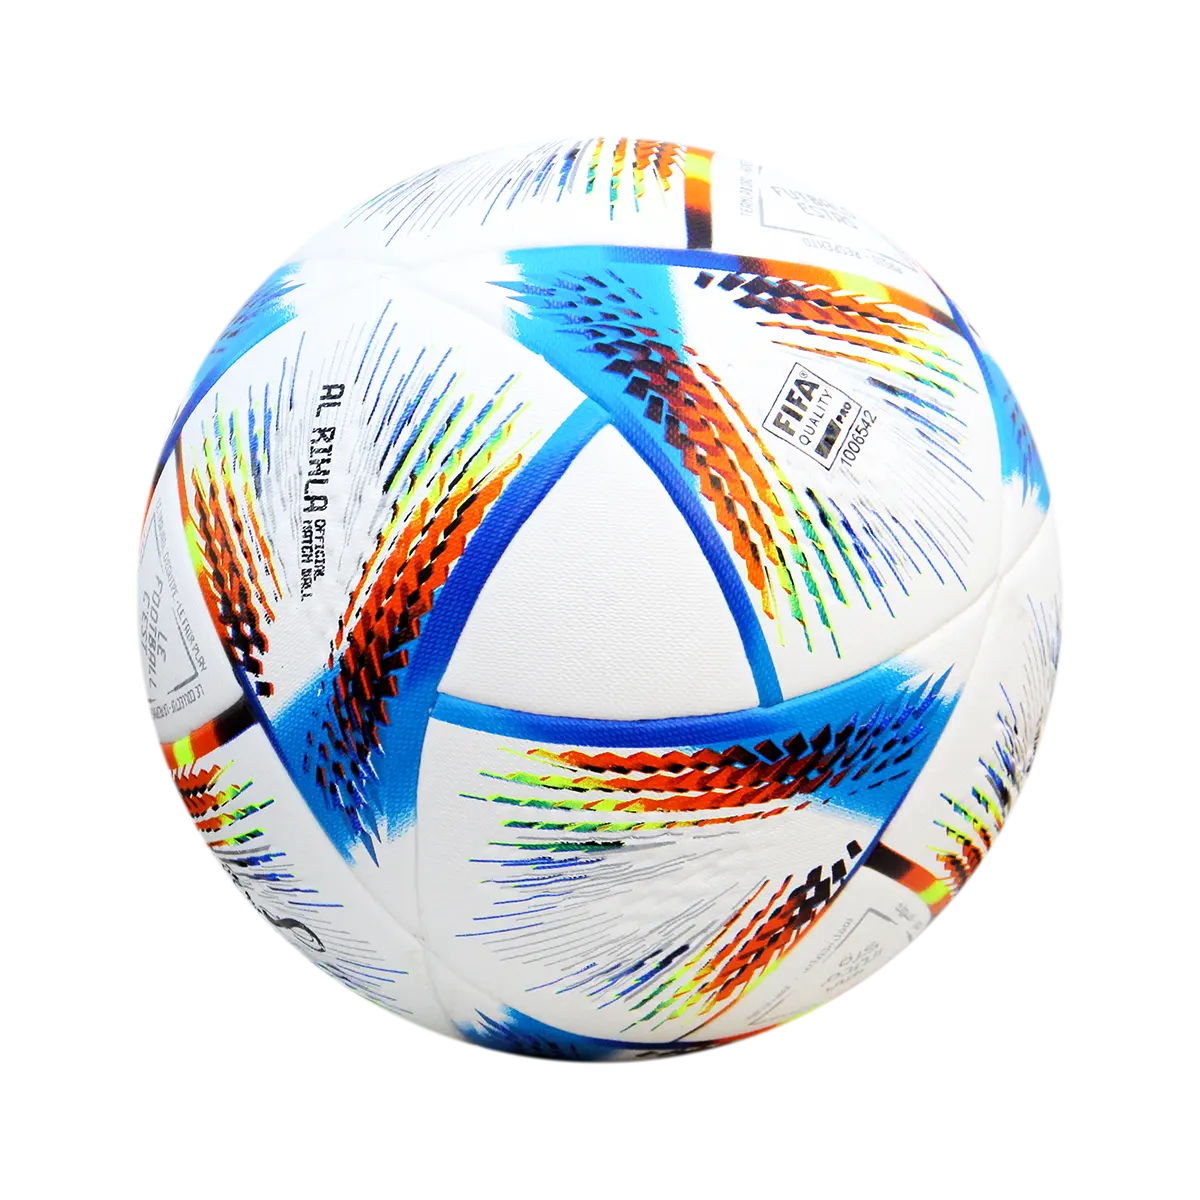 Aolan whole sales high quality thermal bonded football custom soccer ball manufacture